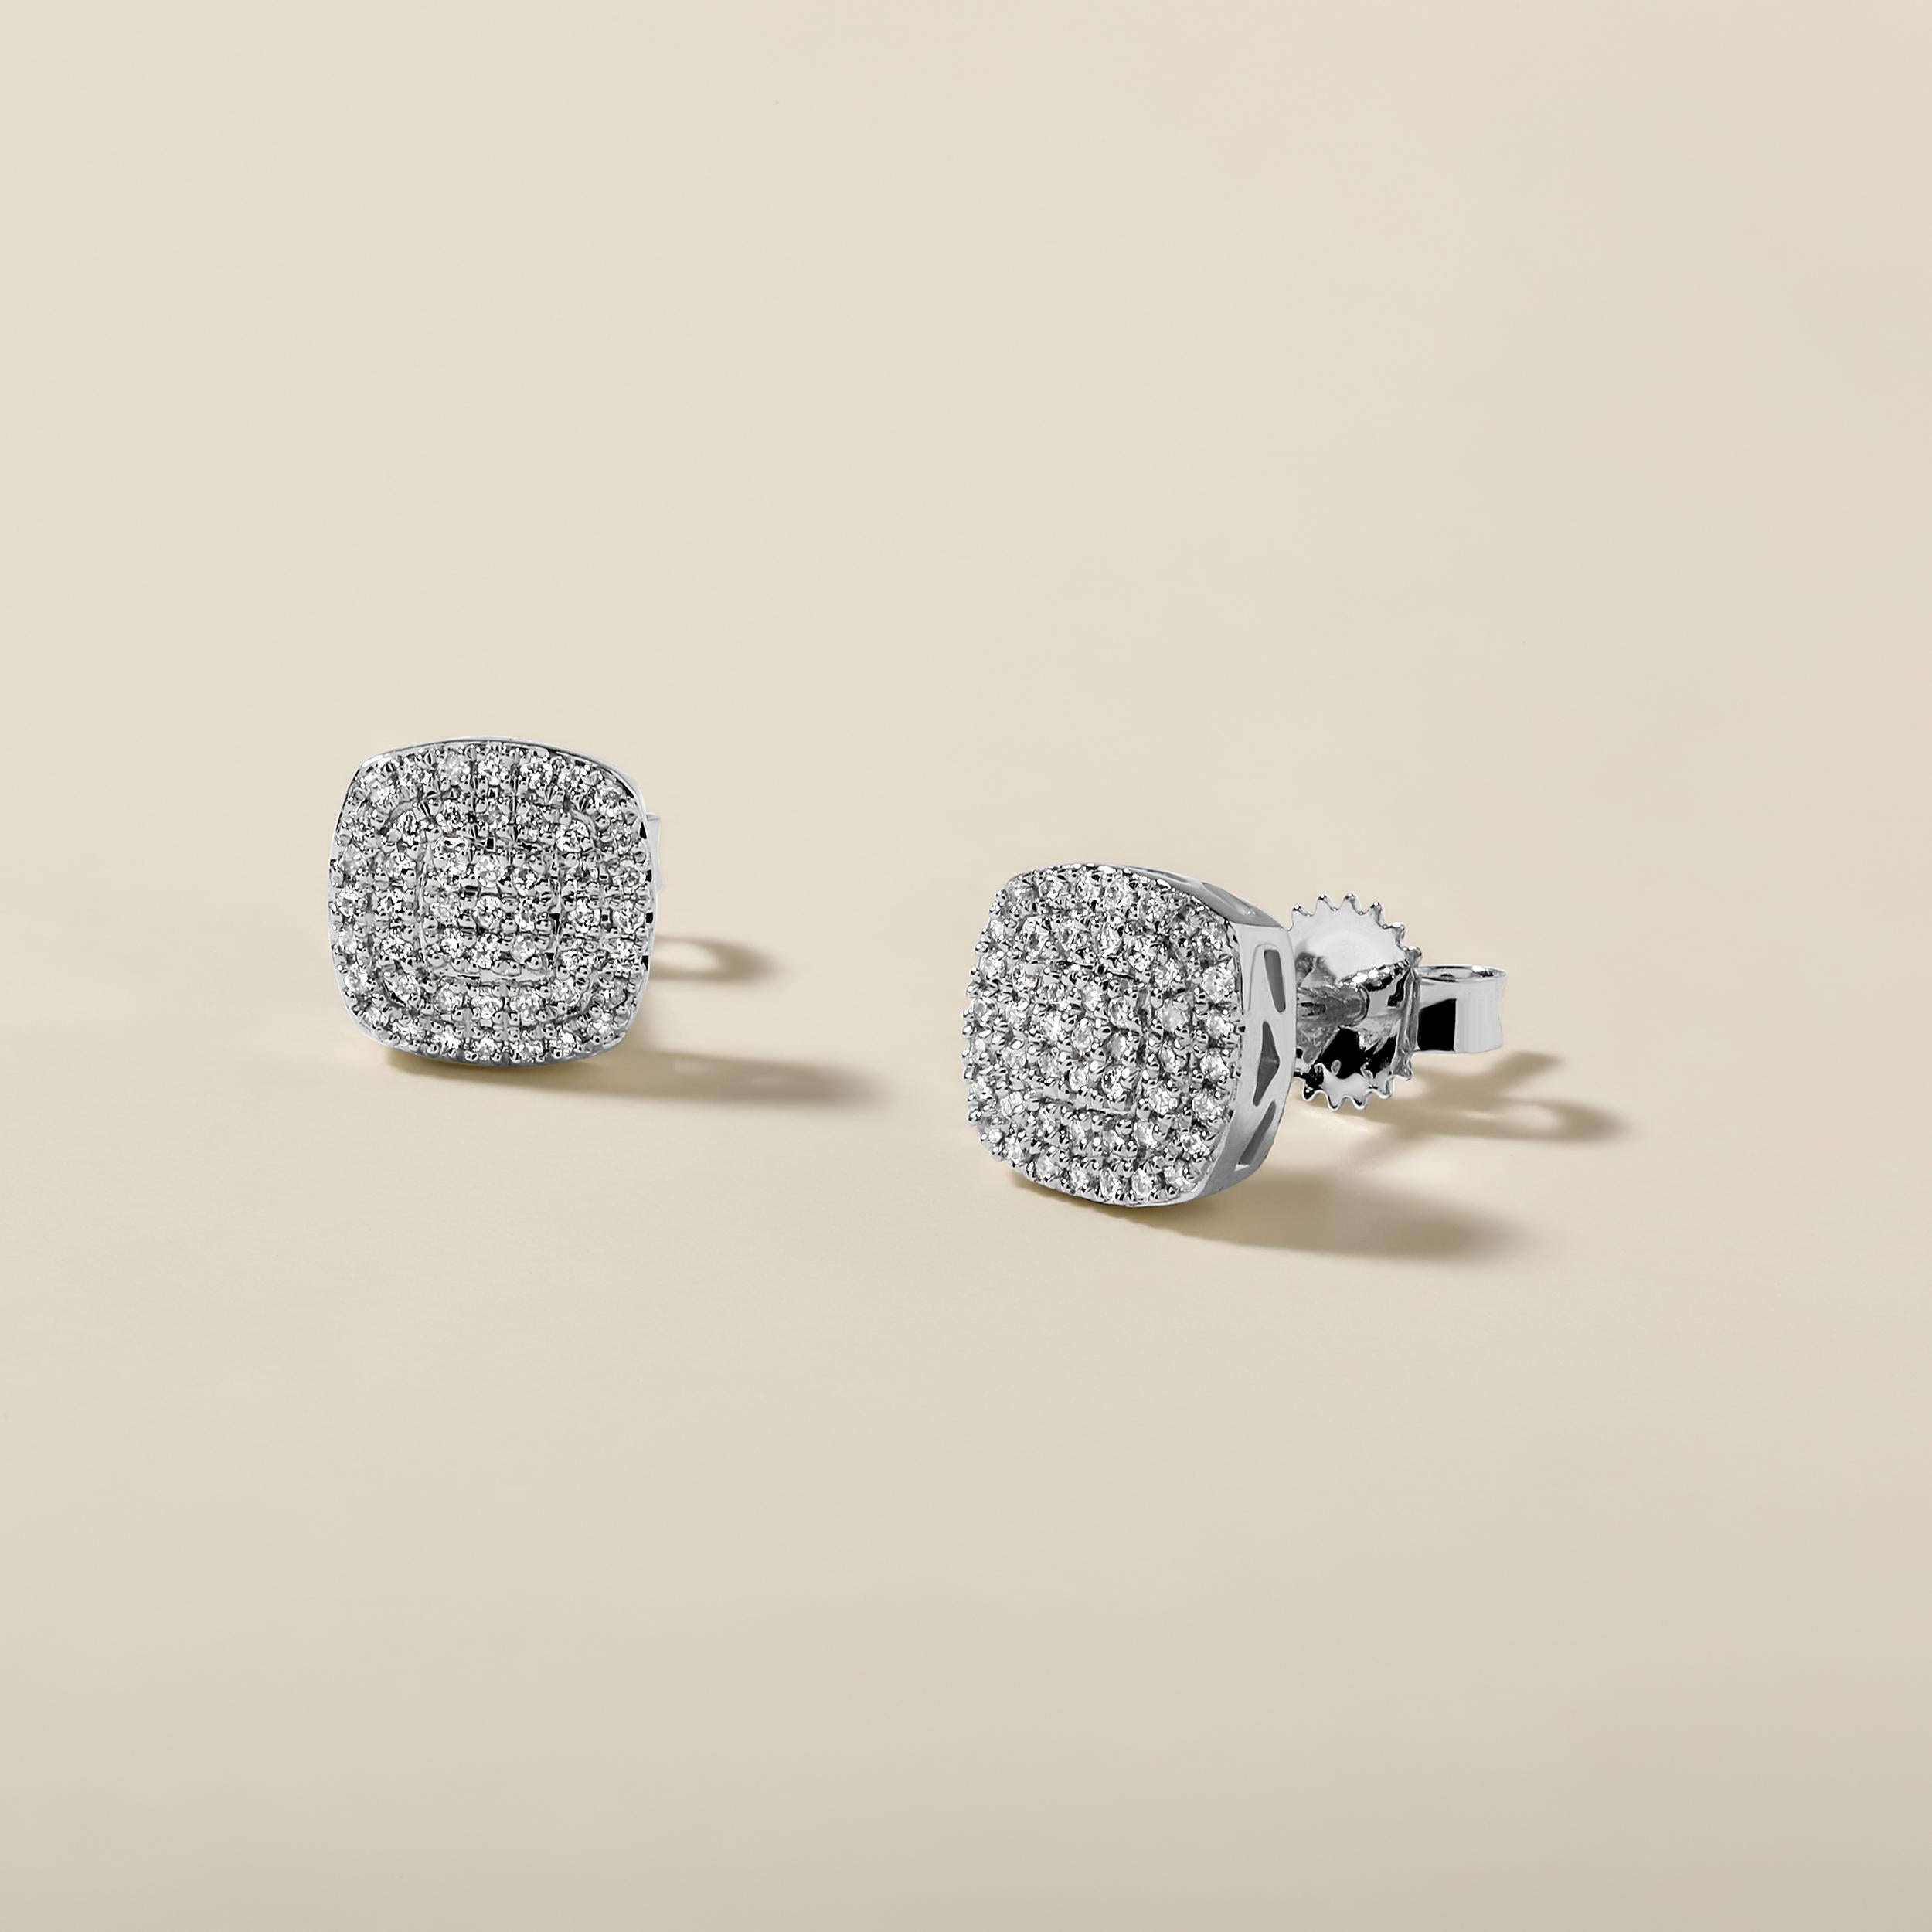 Crafted in 1.68 grams of 14K White Gold, the earrings contain 98 stones of Round Natural Diamonds with a total of 0.14 carat in F-G color and I1-I2 clarity.

CONTEMPORARY AND TIMELESS ESSENCE: Crafted in 14-karat/18-karat with 100% natural diamond